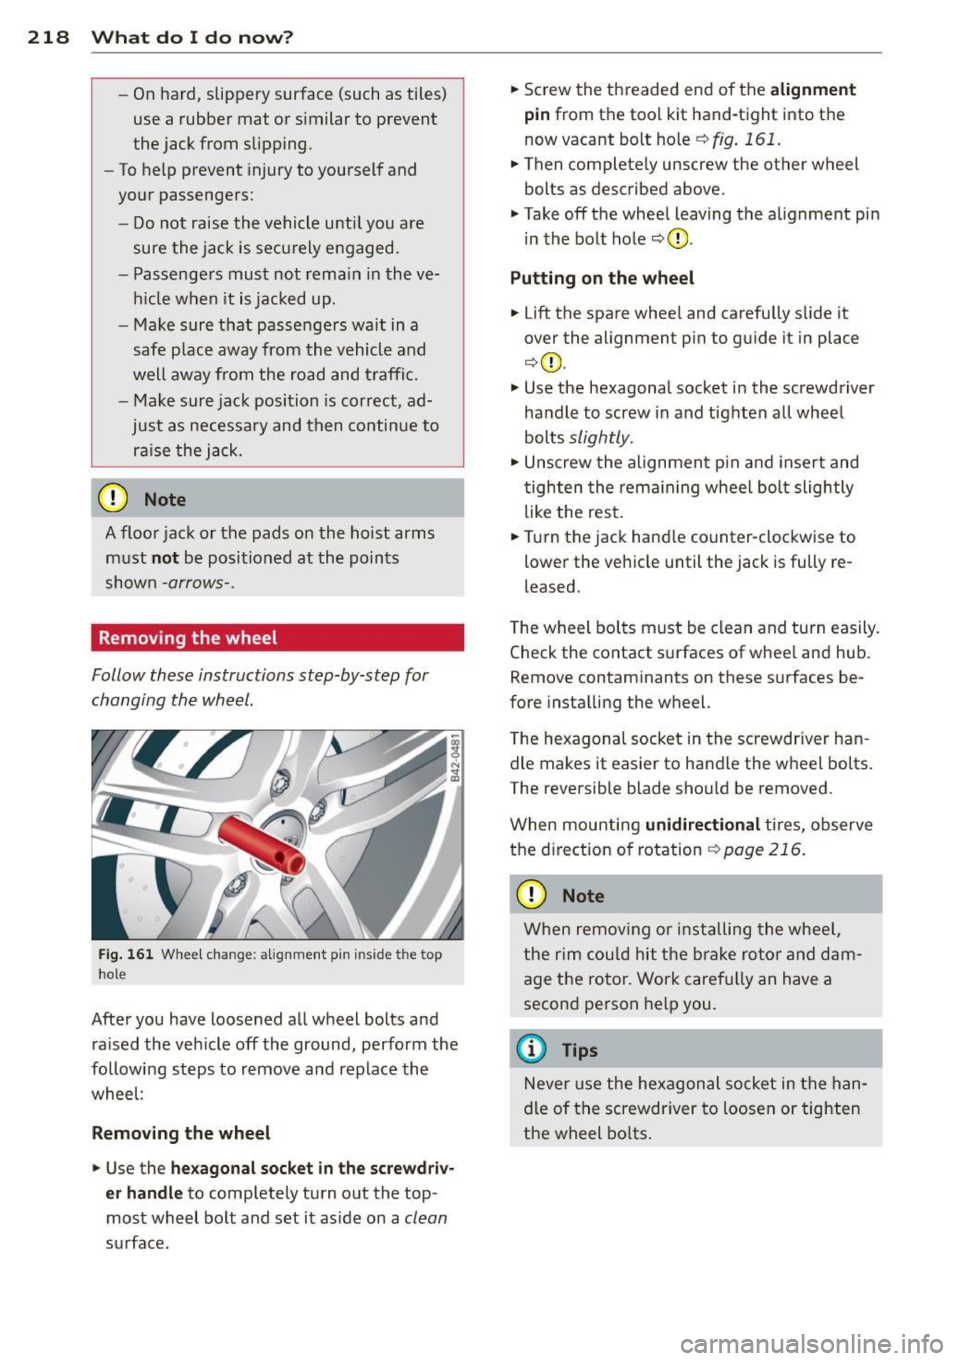 AUDI R8 SPYDER 2011  Owners Manual 218  What  do  I  do  n ow ? 
-On  hard,  slippery  sur face  (such  as tiles) 
use  a  rubber  mat  or  similar  to  prevent 
the  jack  from  slipping. 
- To help  prevent  injury  to  yourself  and